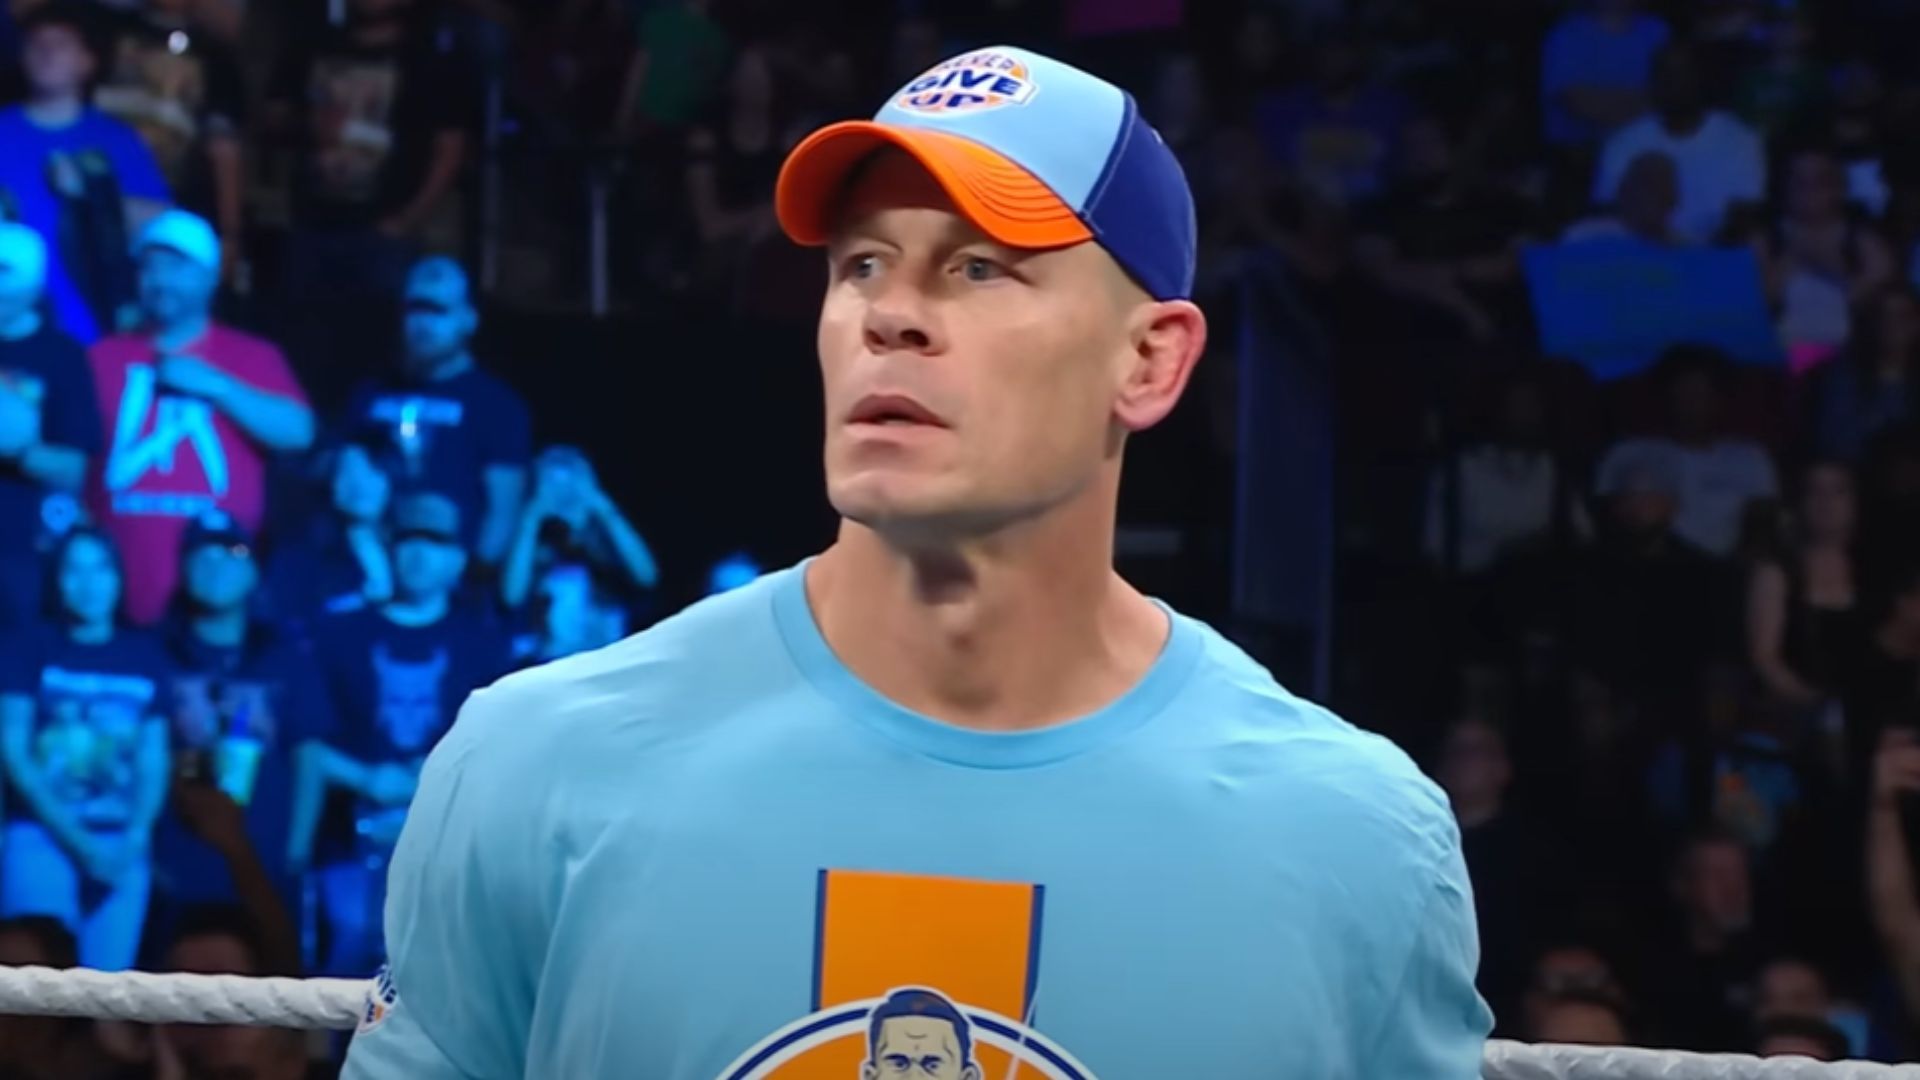 John Cena is widely viewed as one of the greatest WWE stars of all time